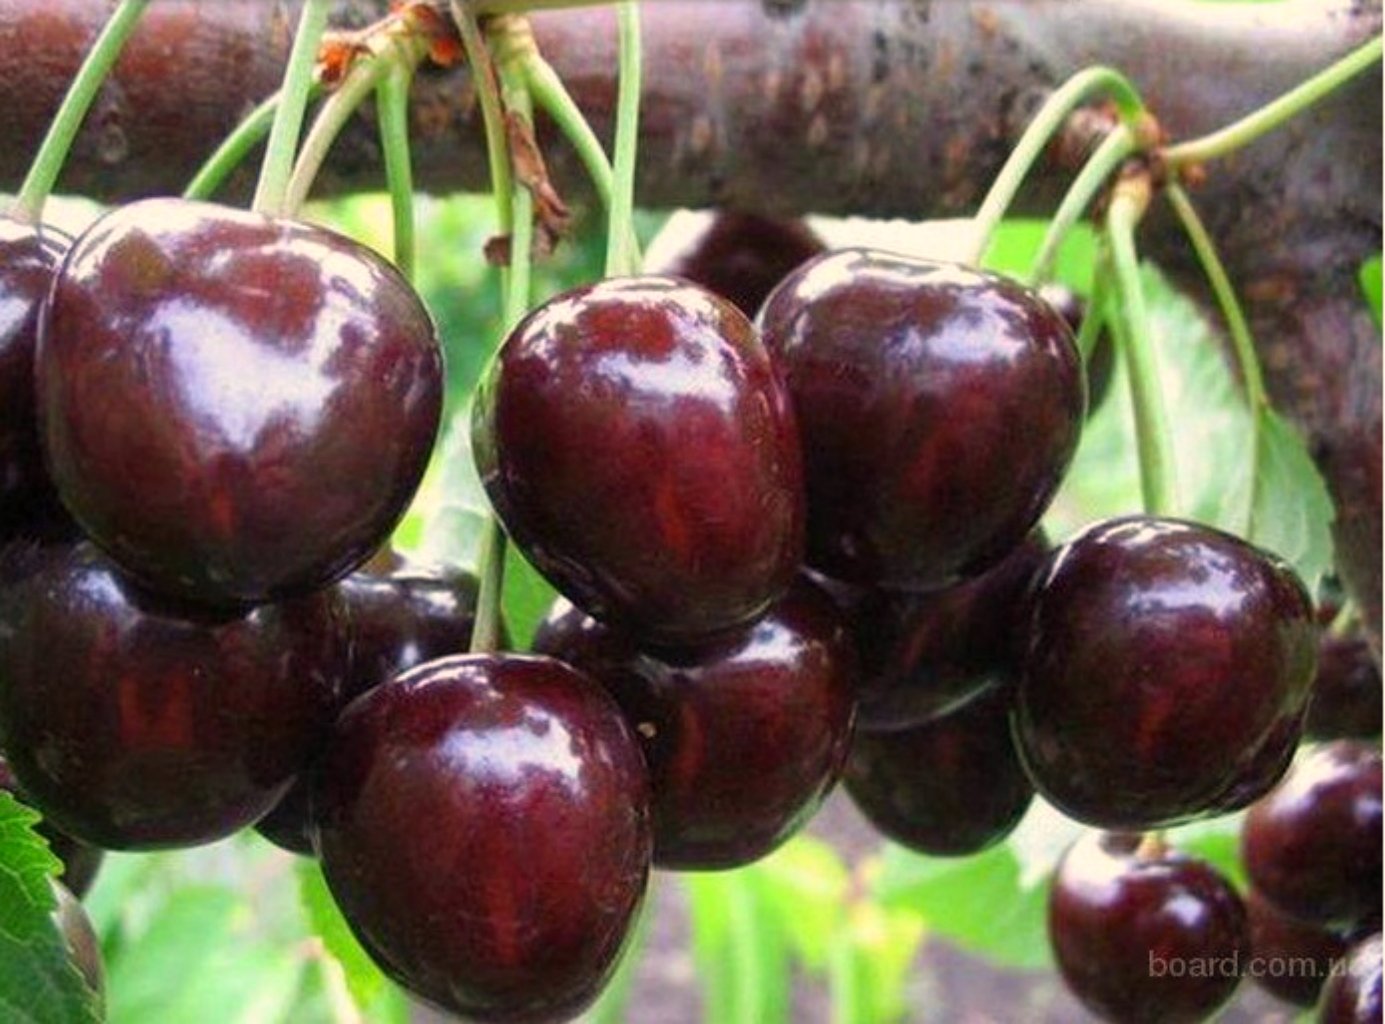 How Difficult It Is to Work on Collecting Cherries in Melitopol